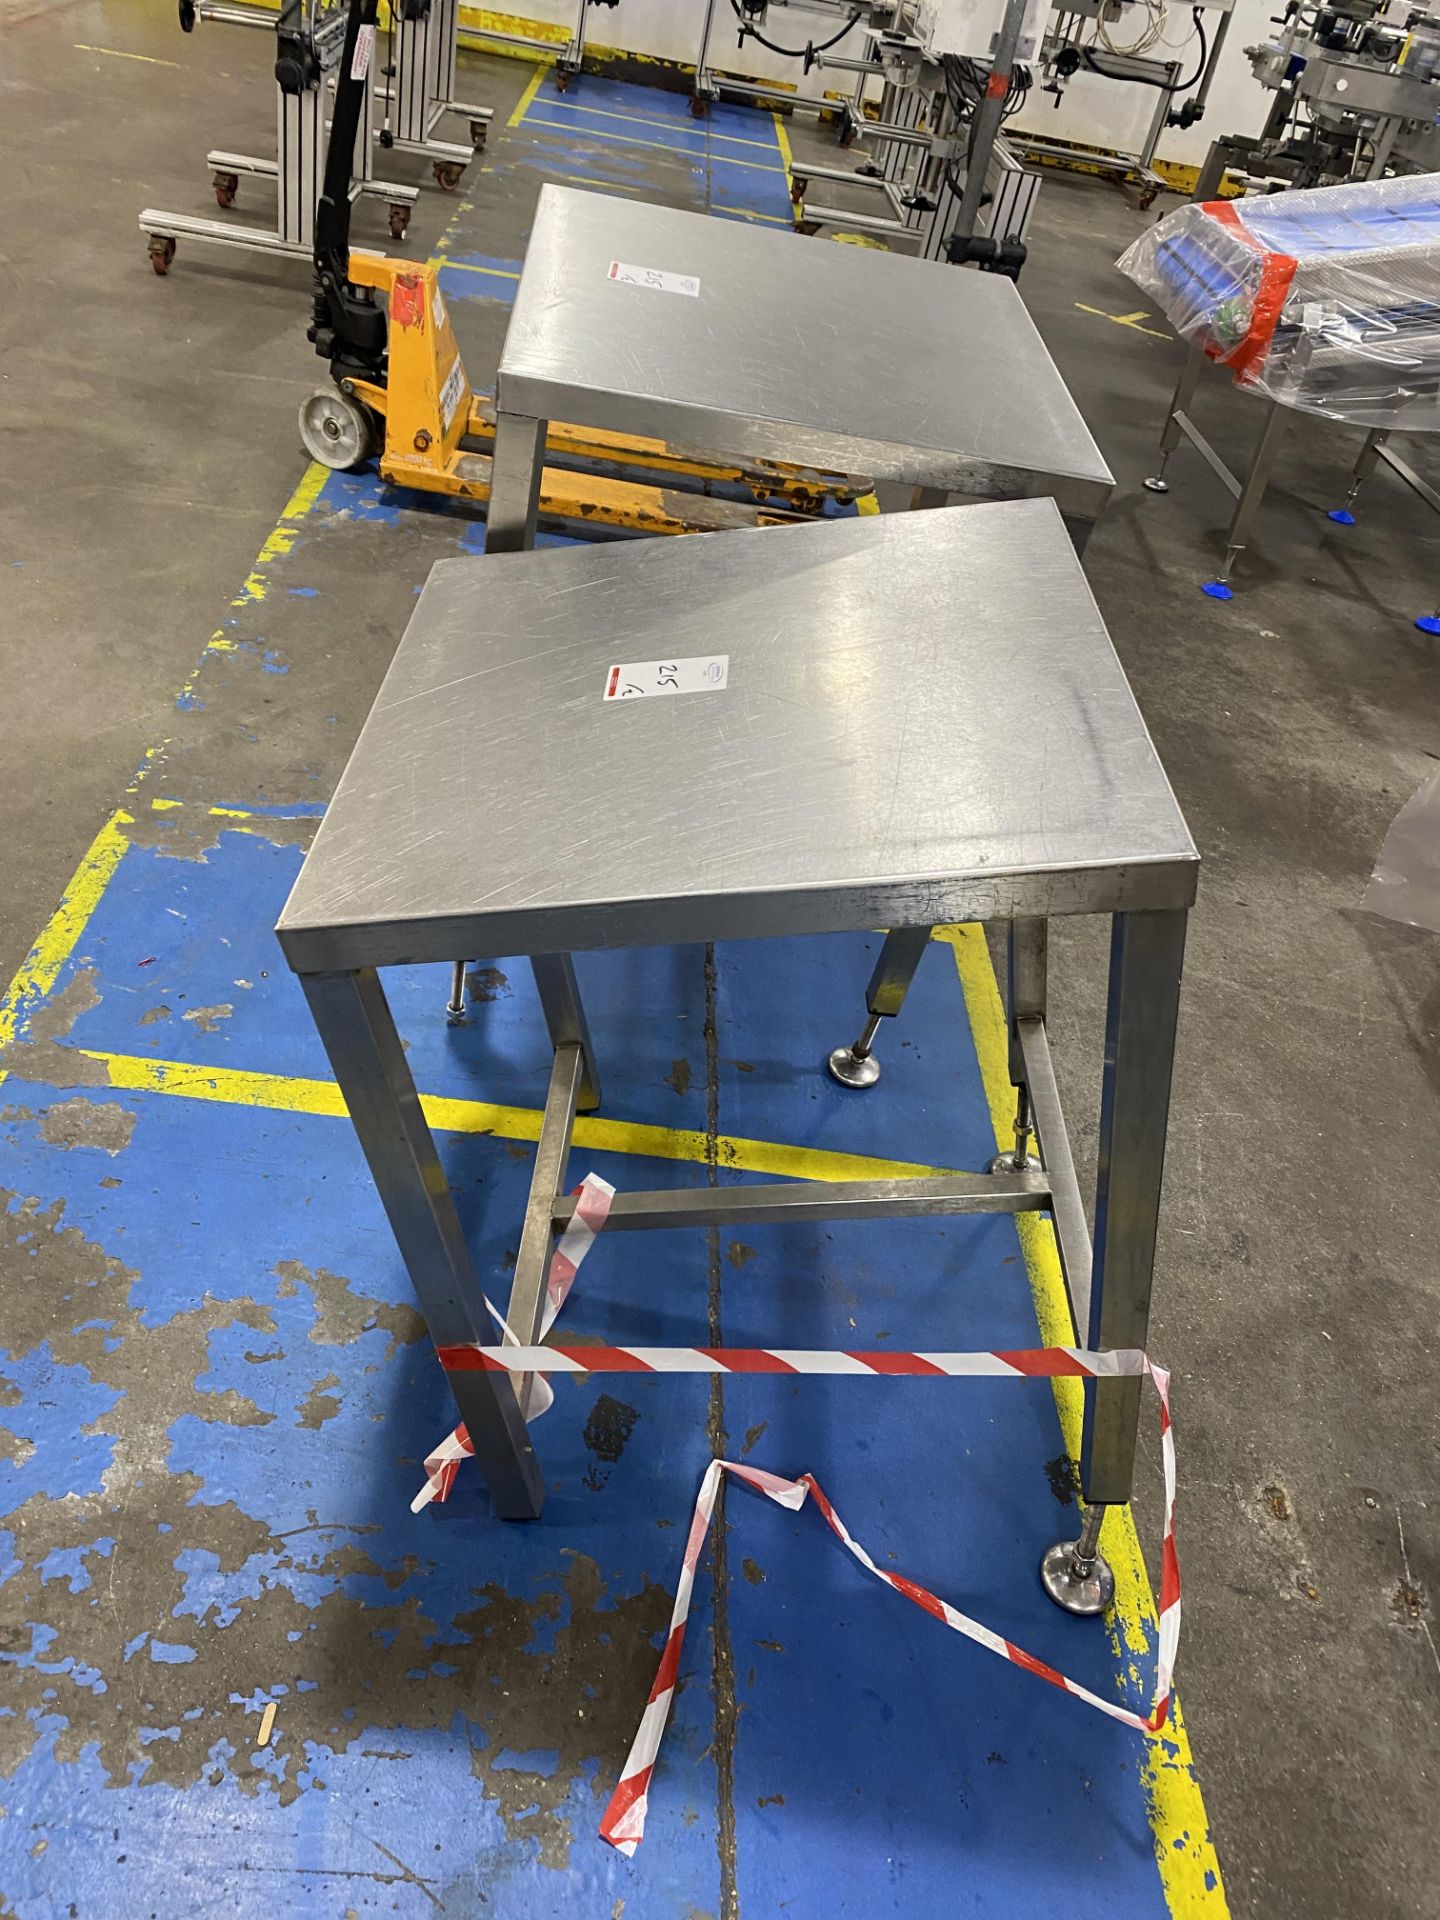 2 Stainless steel heavy duty tables 60cm2 - Image 2 of 2